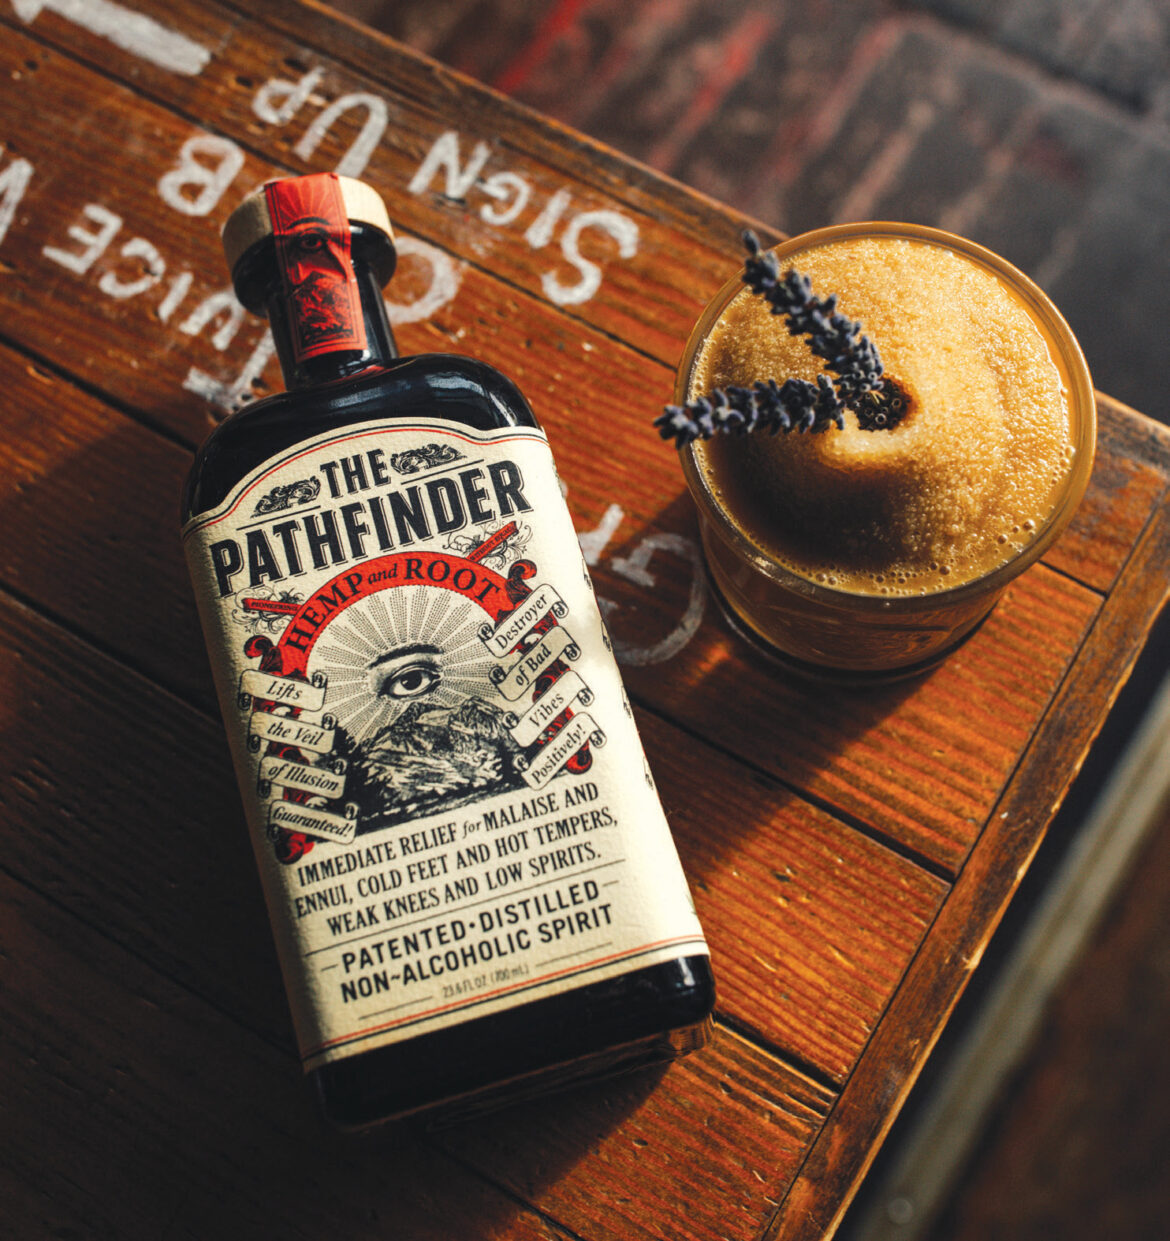 The Pathfinder is a hemp-based non-alcoholic spirit that joins the new creative mix of mocktails.